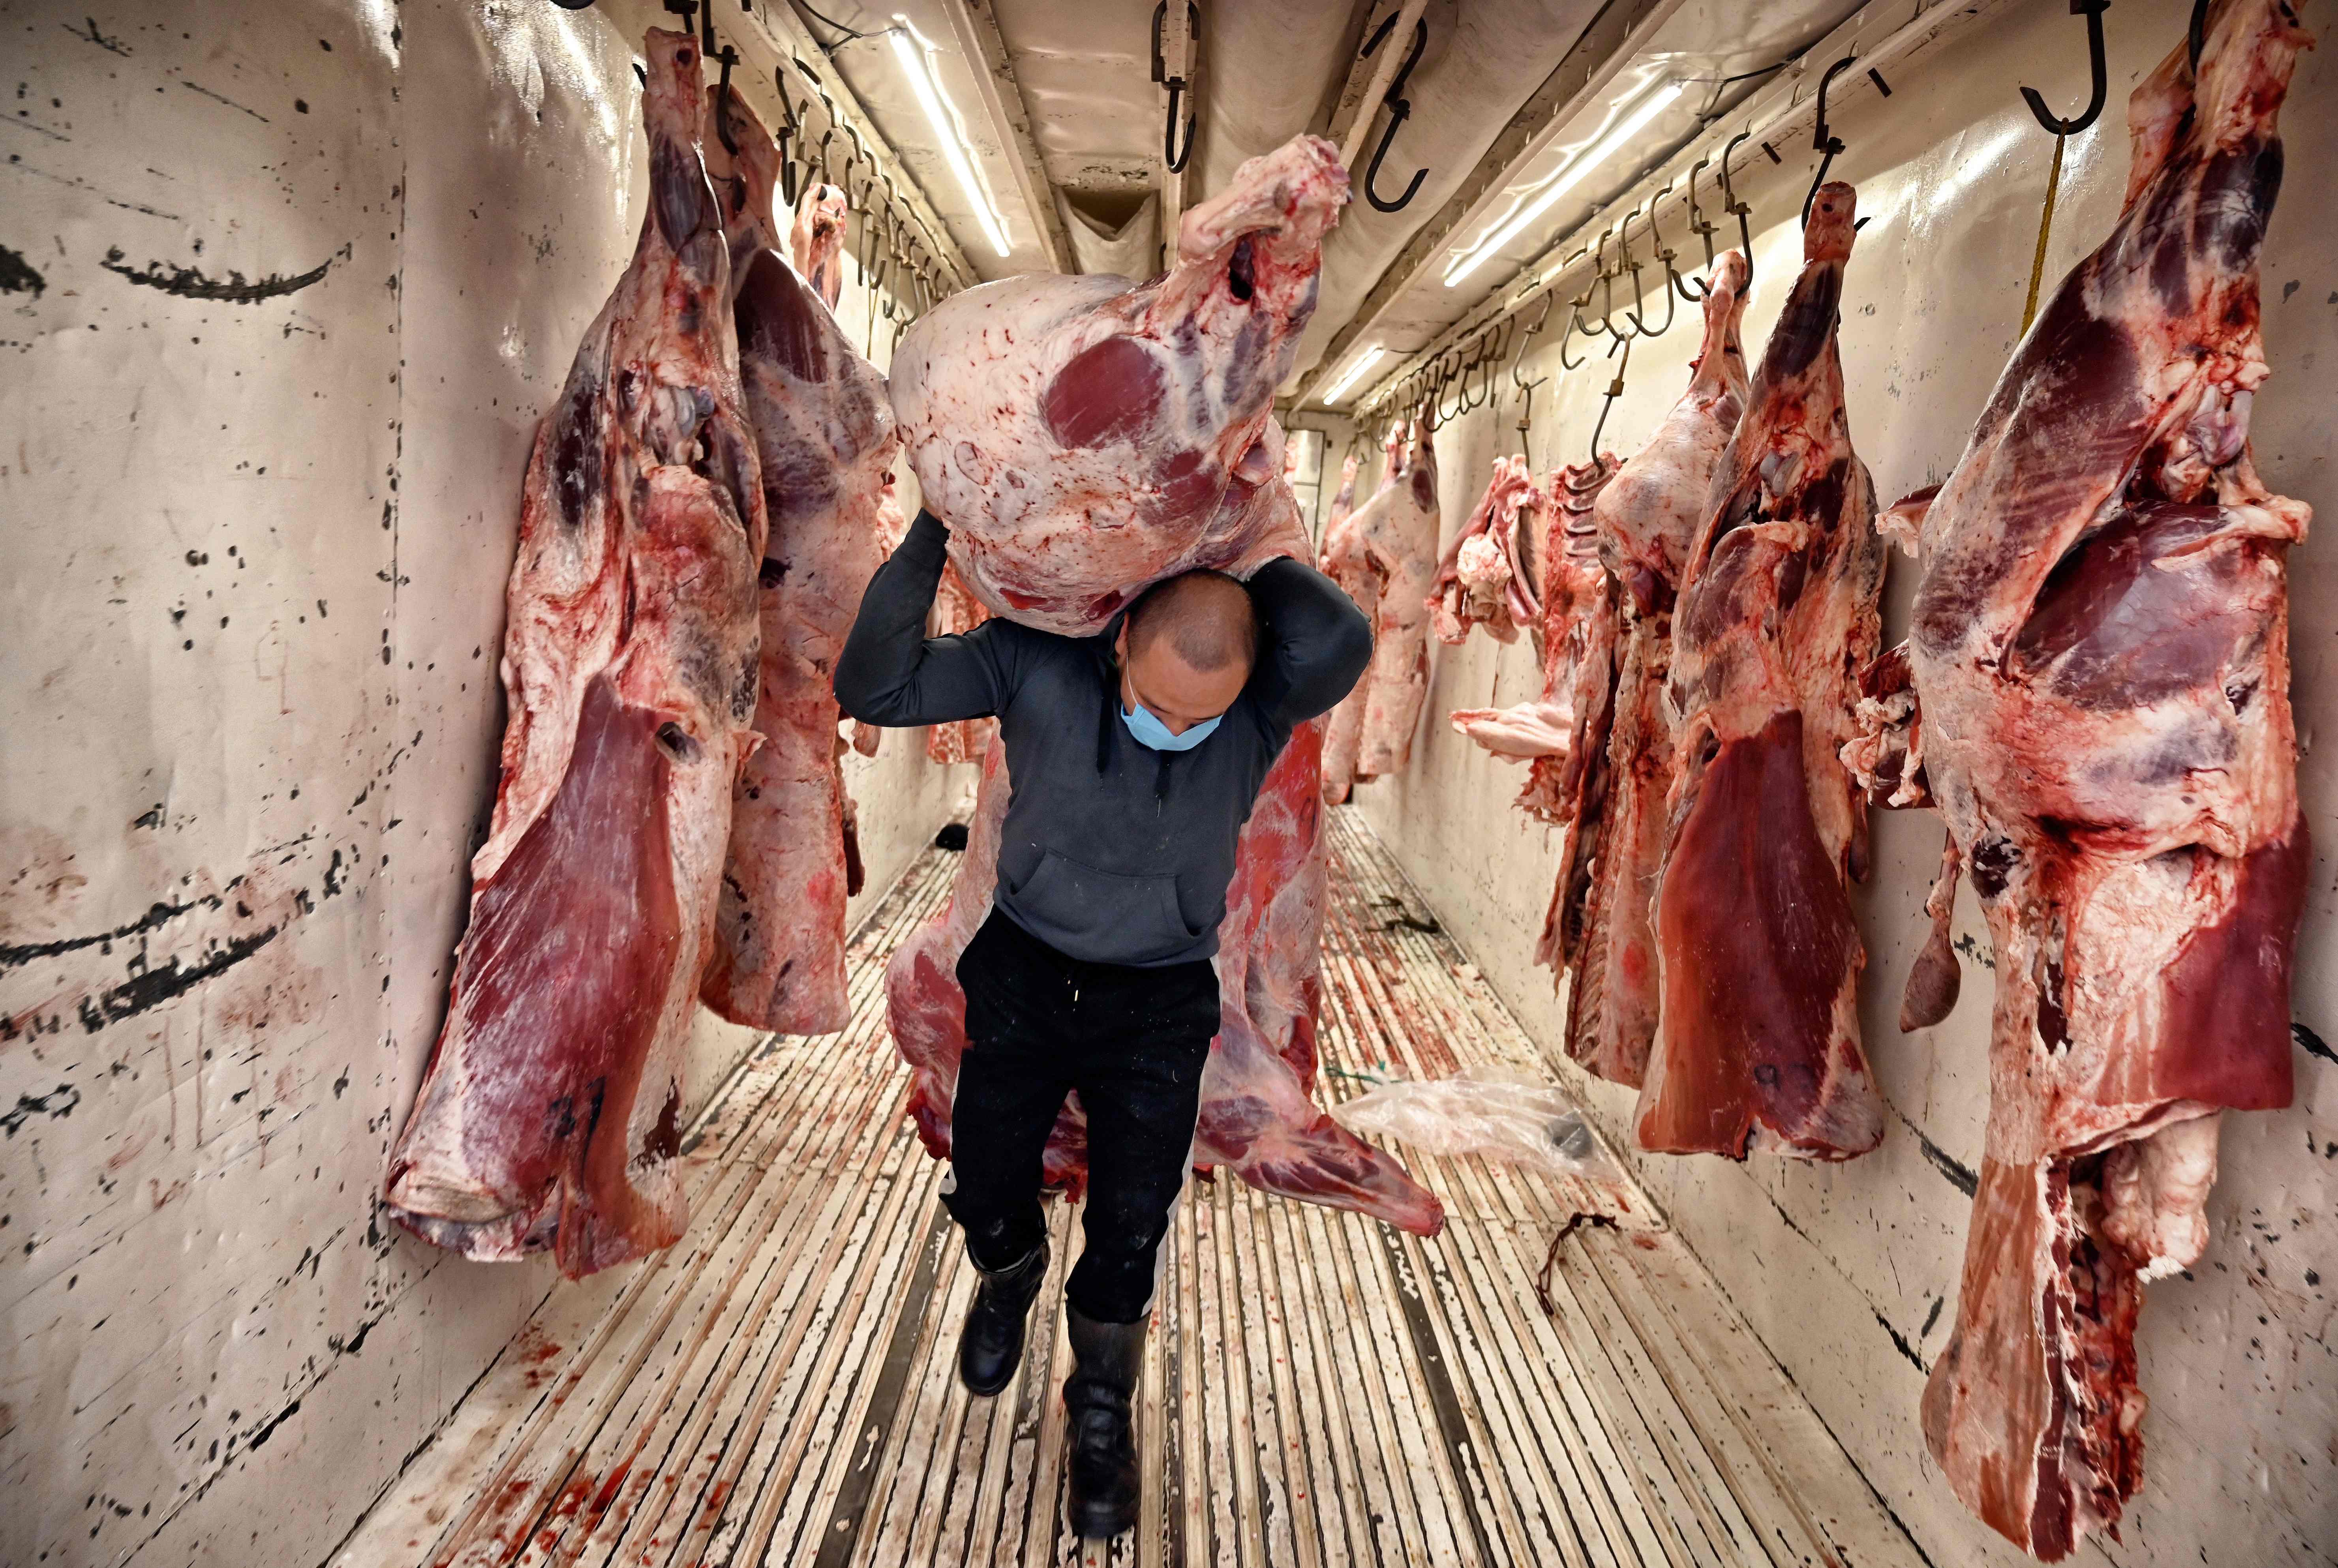 A worker carries a half carcass inside a container truck at the Minillas Meat Market in Mexico City on July 3, 2020 as Mexico authorized the reopening of restaurants, shops, street markets and sport complexes but with limited capacity and hours amid the COVID-19 novel coronavirus pandemic. (Photo by Alfredo ESTRELLA / AFP)